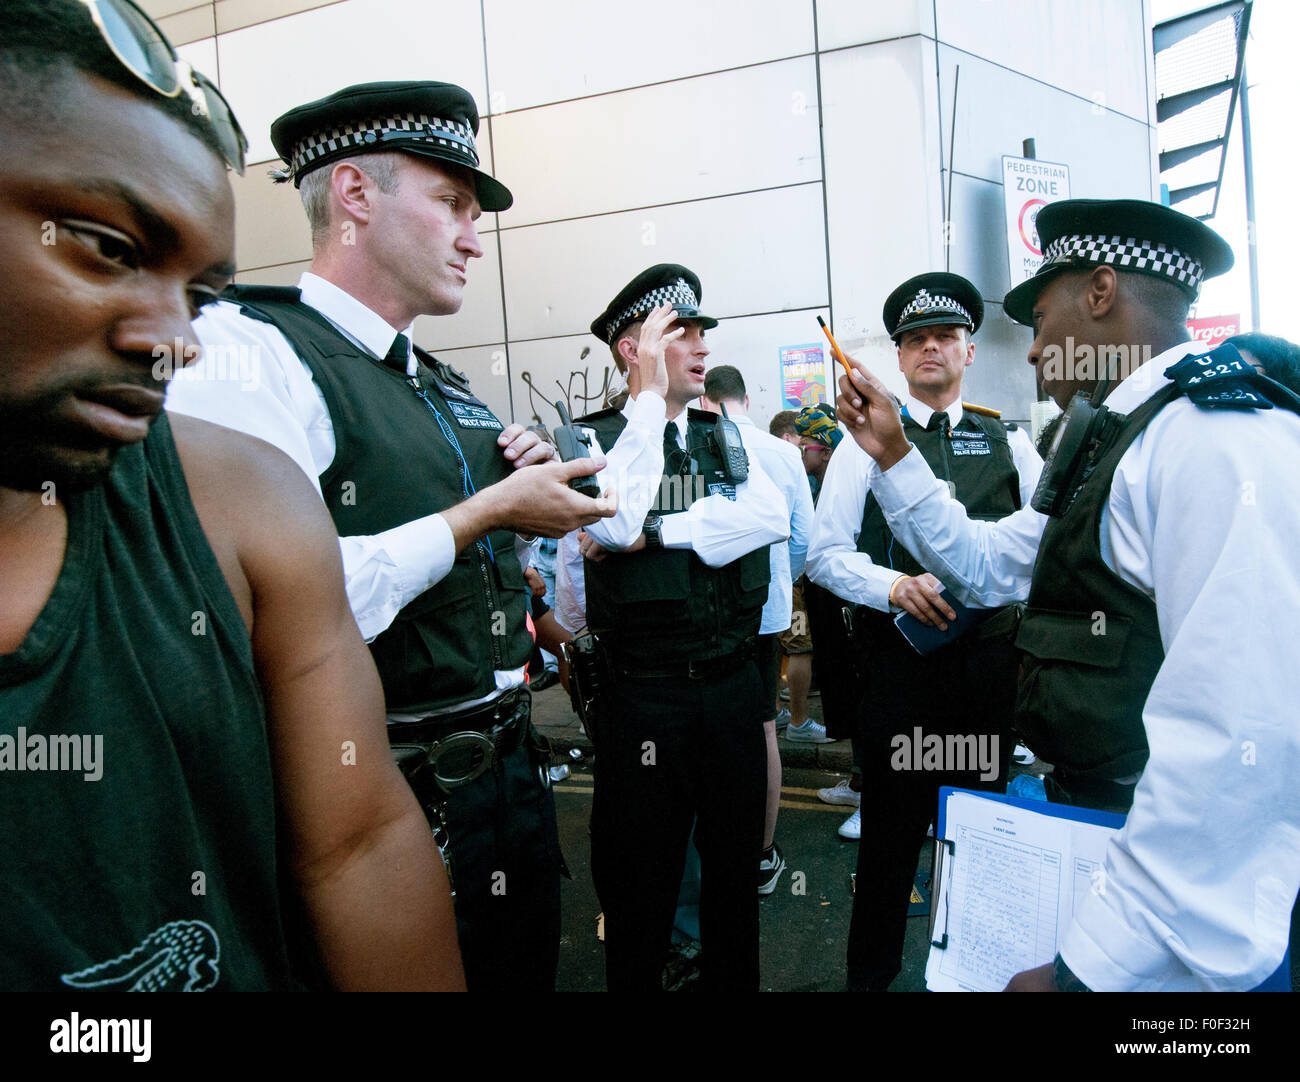 Policeman instructing group of police officers at Brixton Splash festival Stock Photo